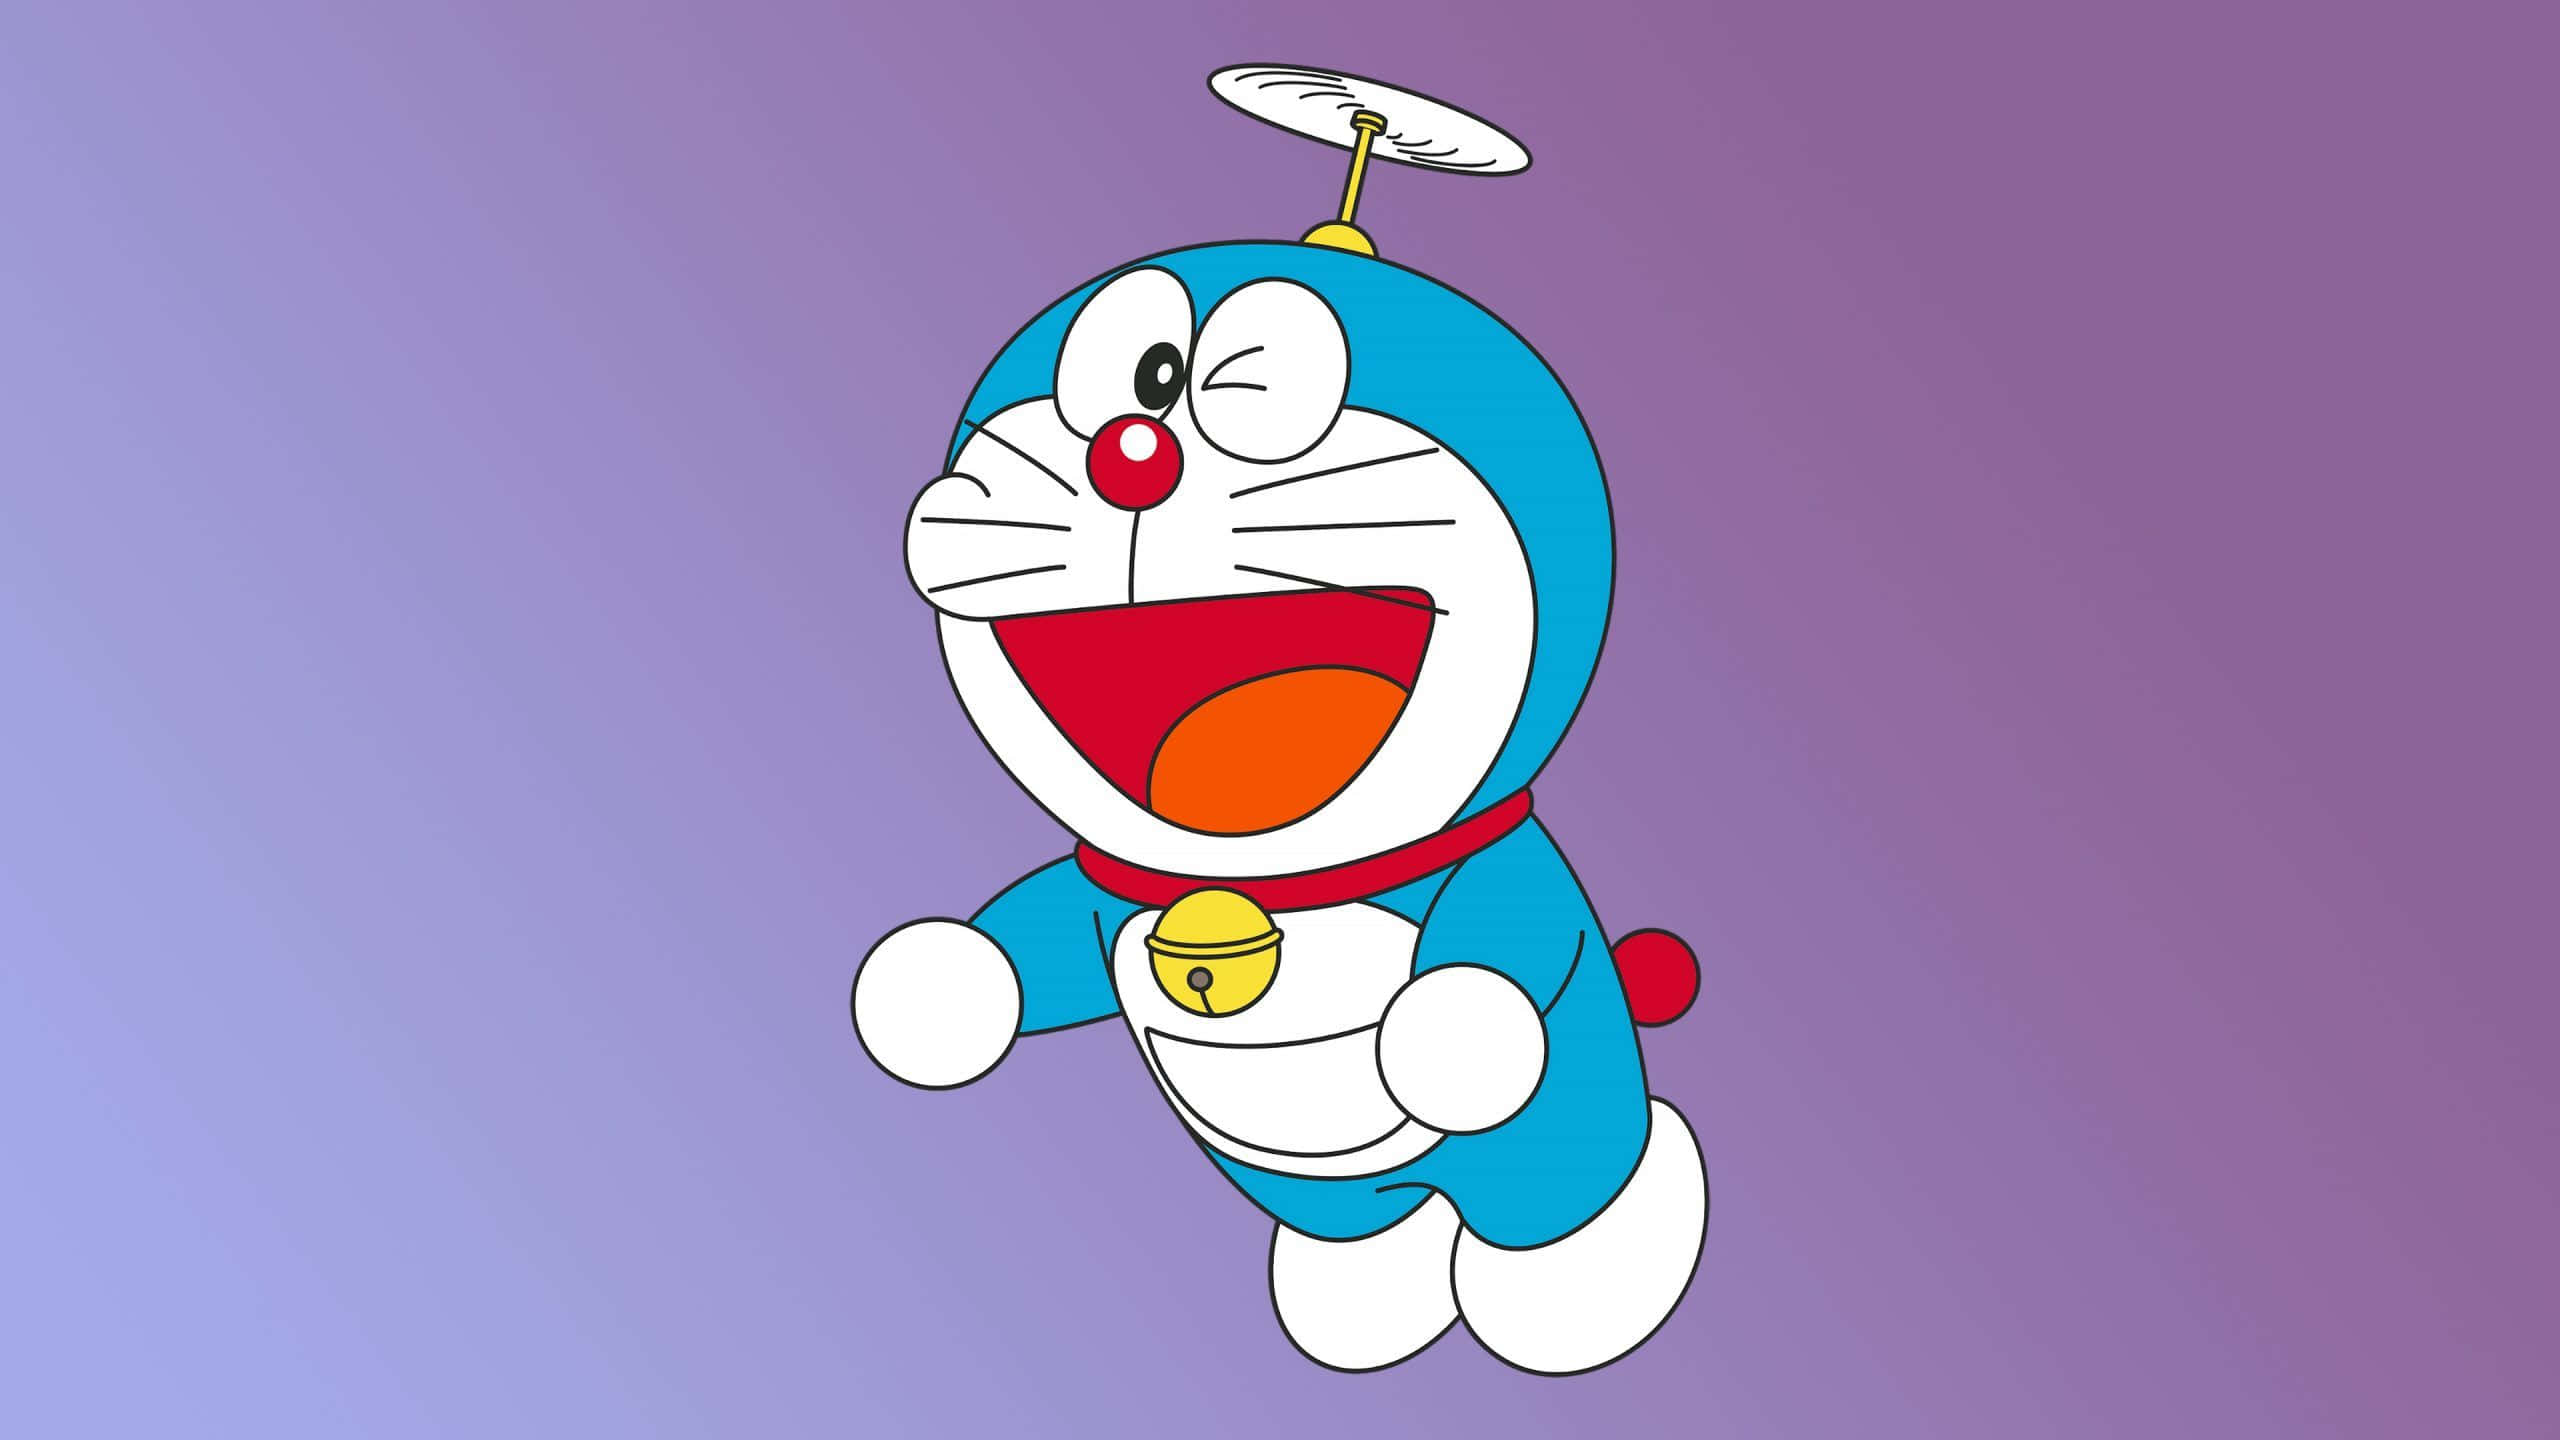 Doraemon and his friends enjoy a peaceful day